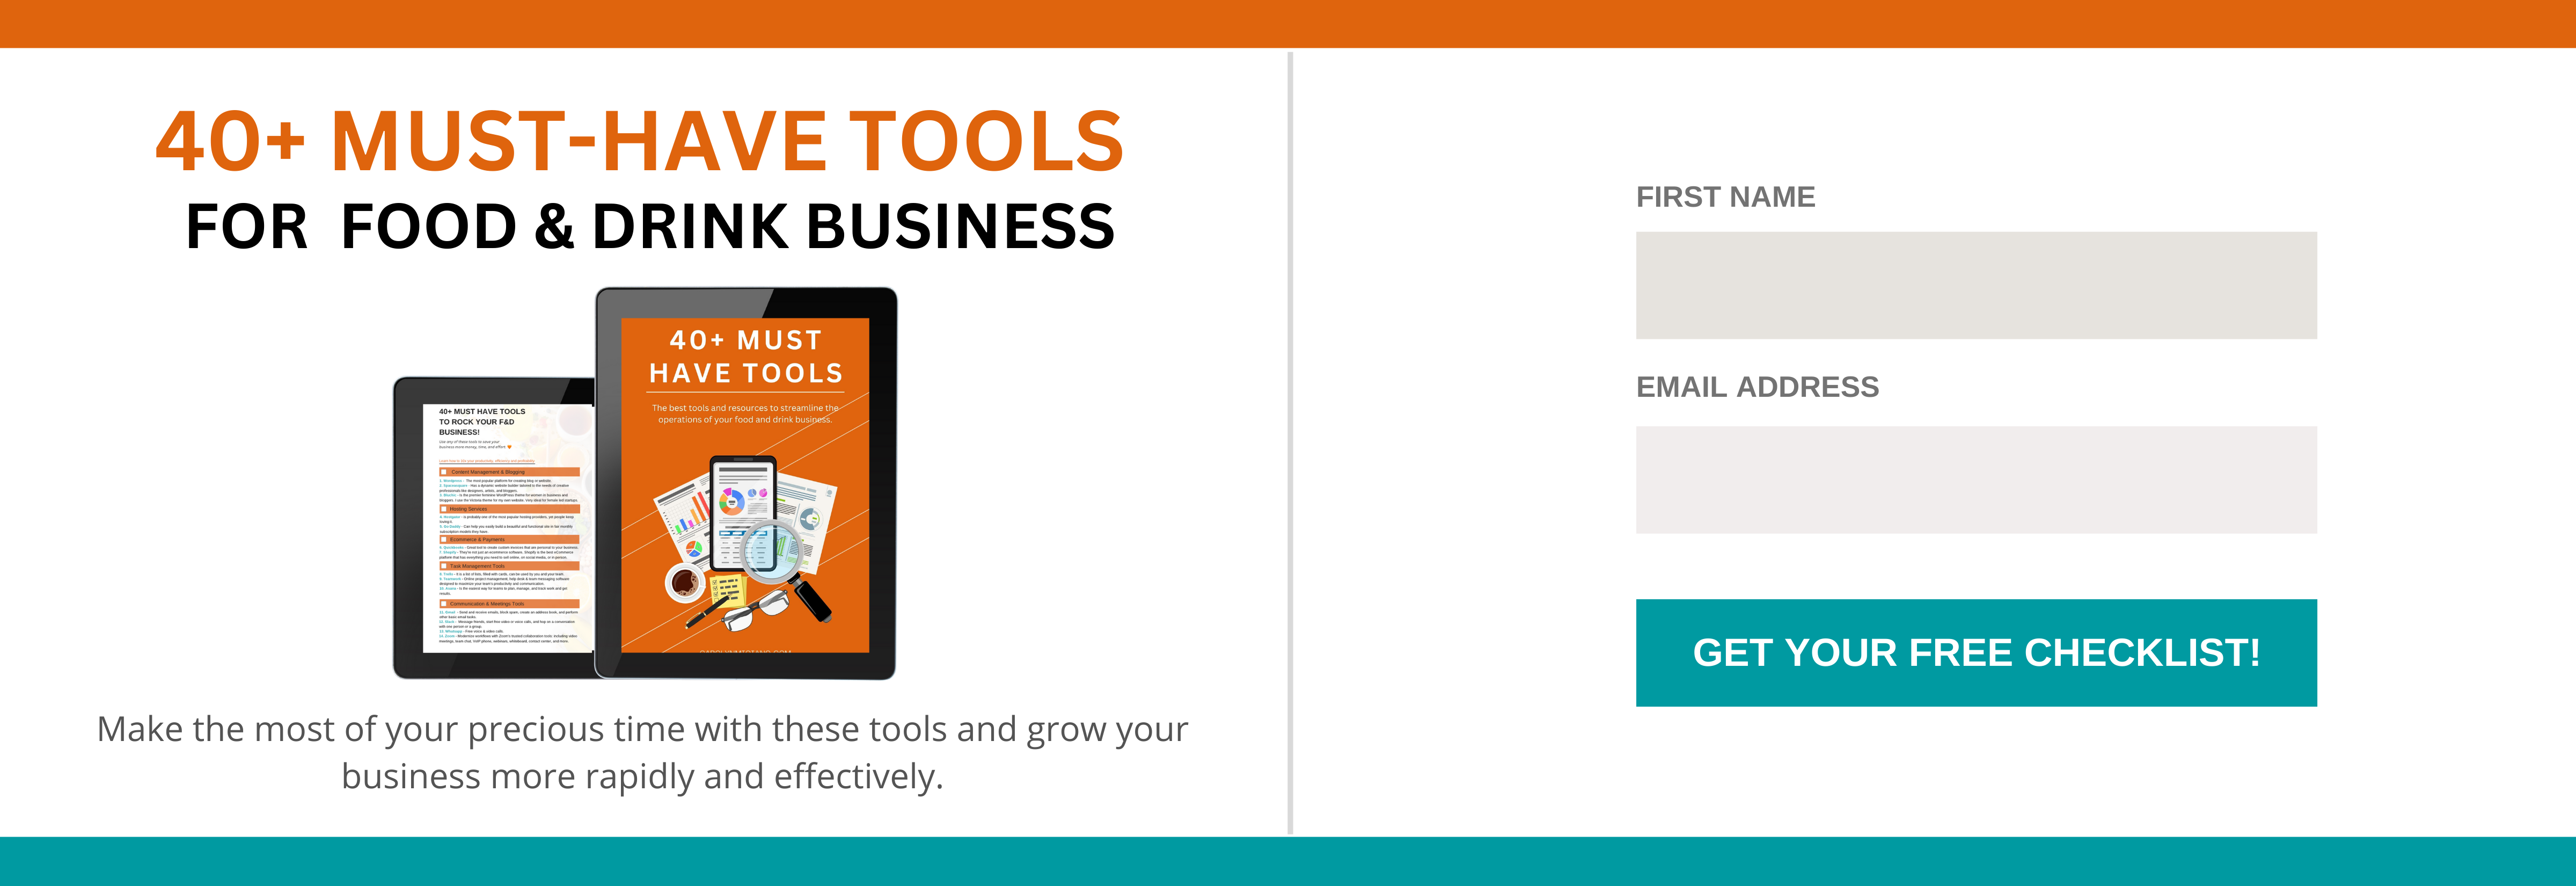 40+ MUST HAVE TOOLS FOR PACKAGED FOOD & DRINK BUSINESS OWONERS